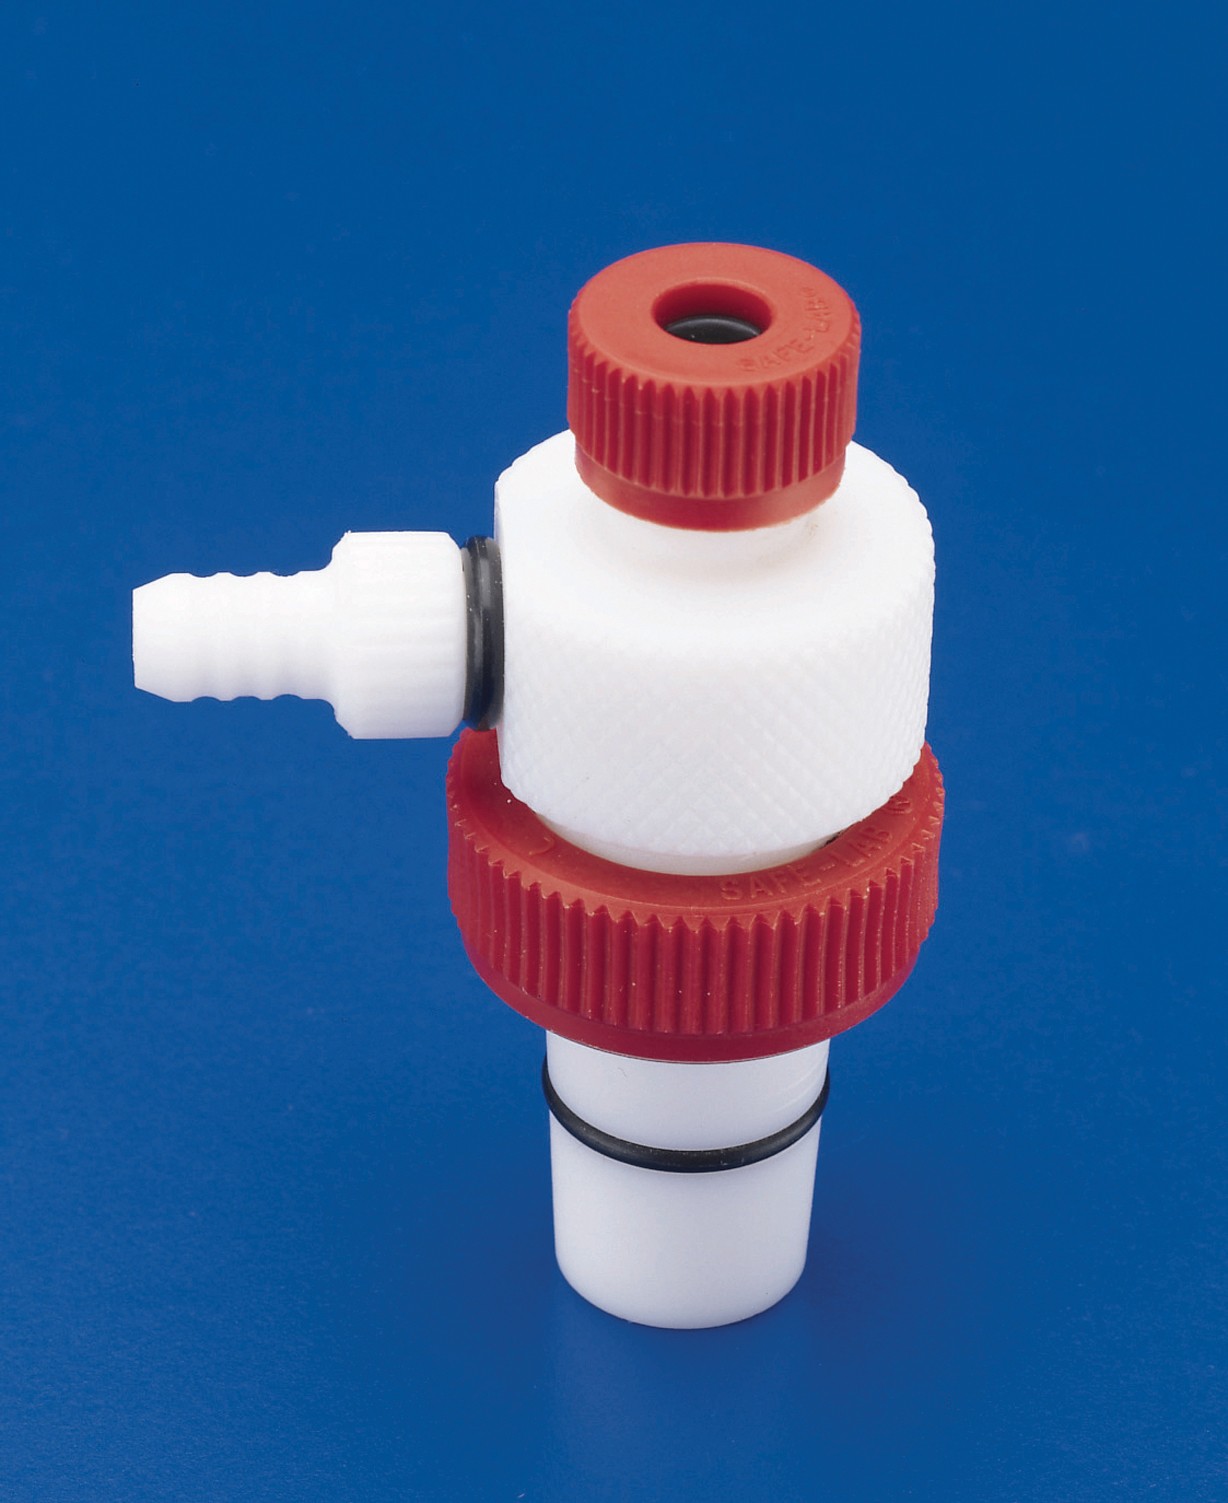 Safe-Lab Therm-O-Vac Joint Adapter for Tapered Joints